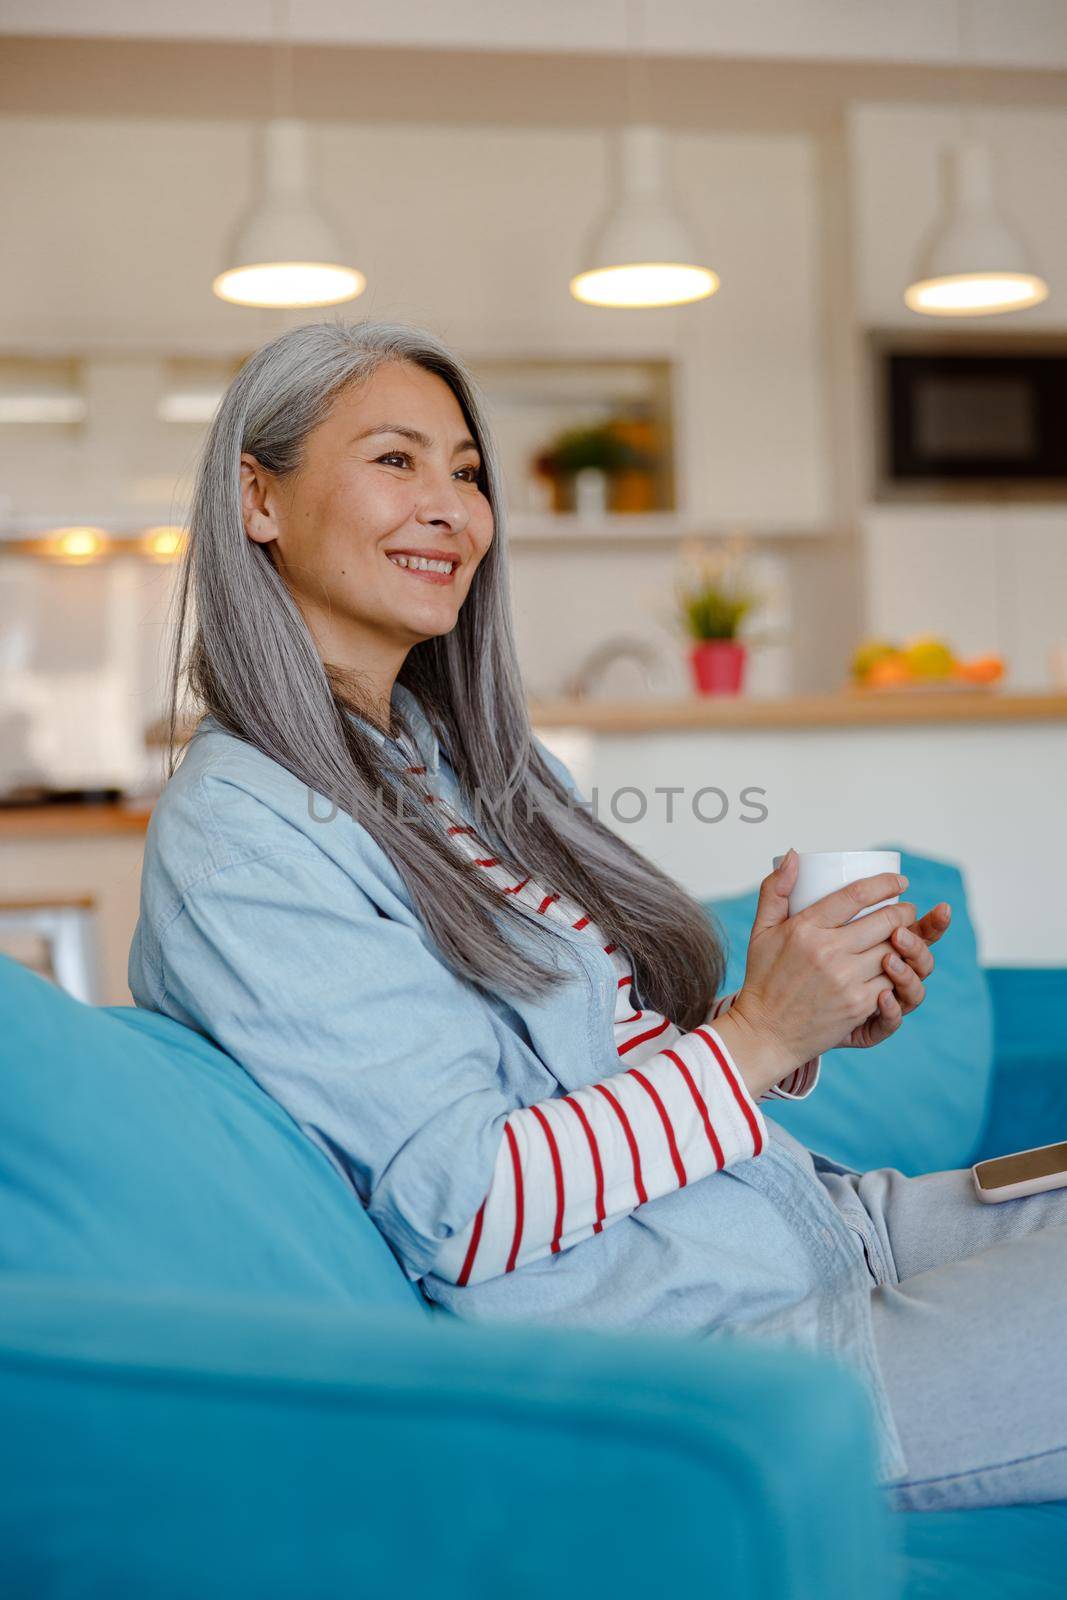 Joyful female person looking away and smiling while resting on sofa and holding mug of hot drink